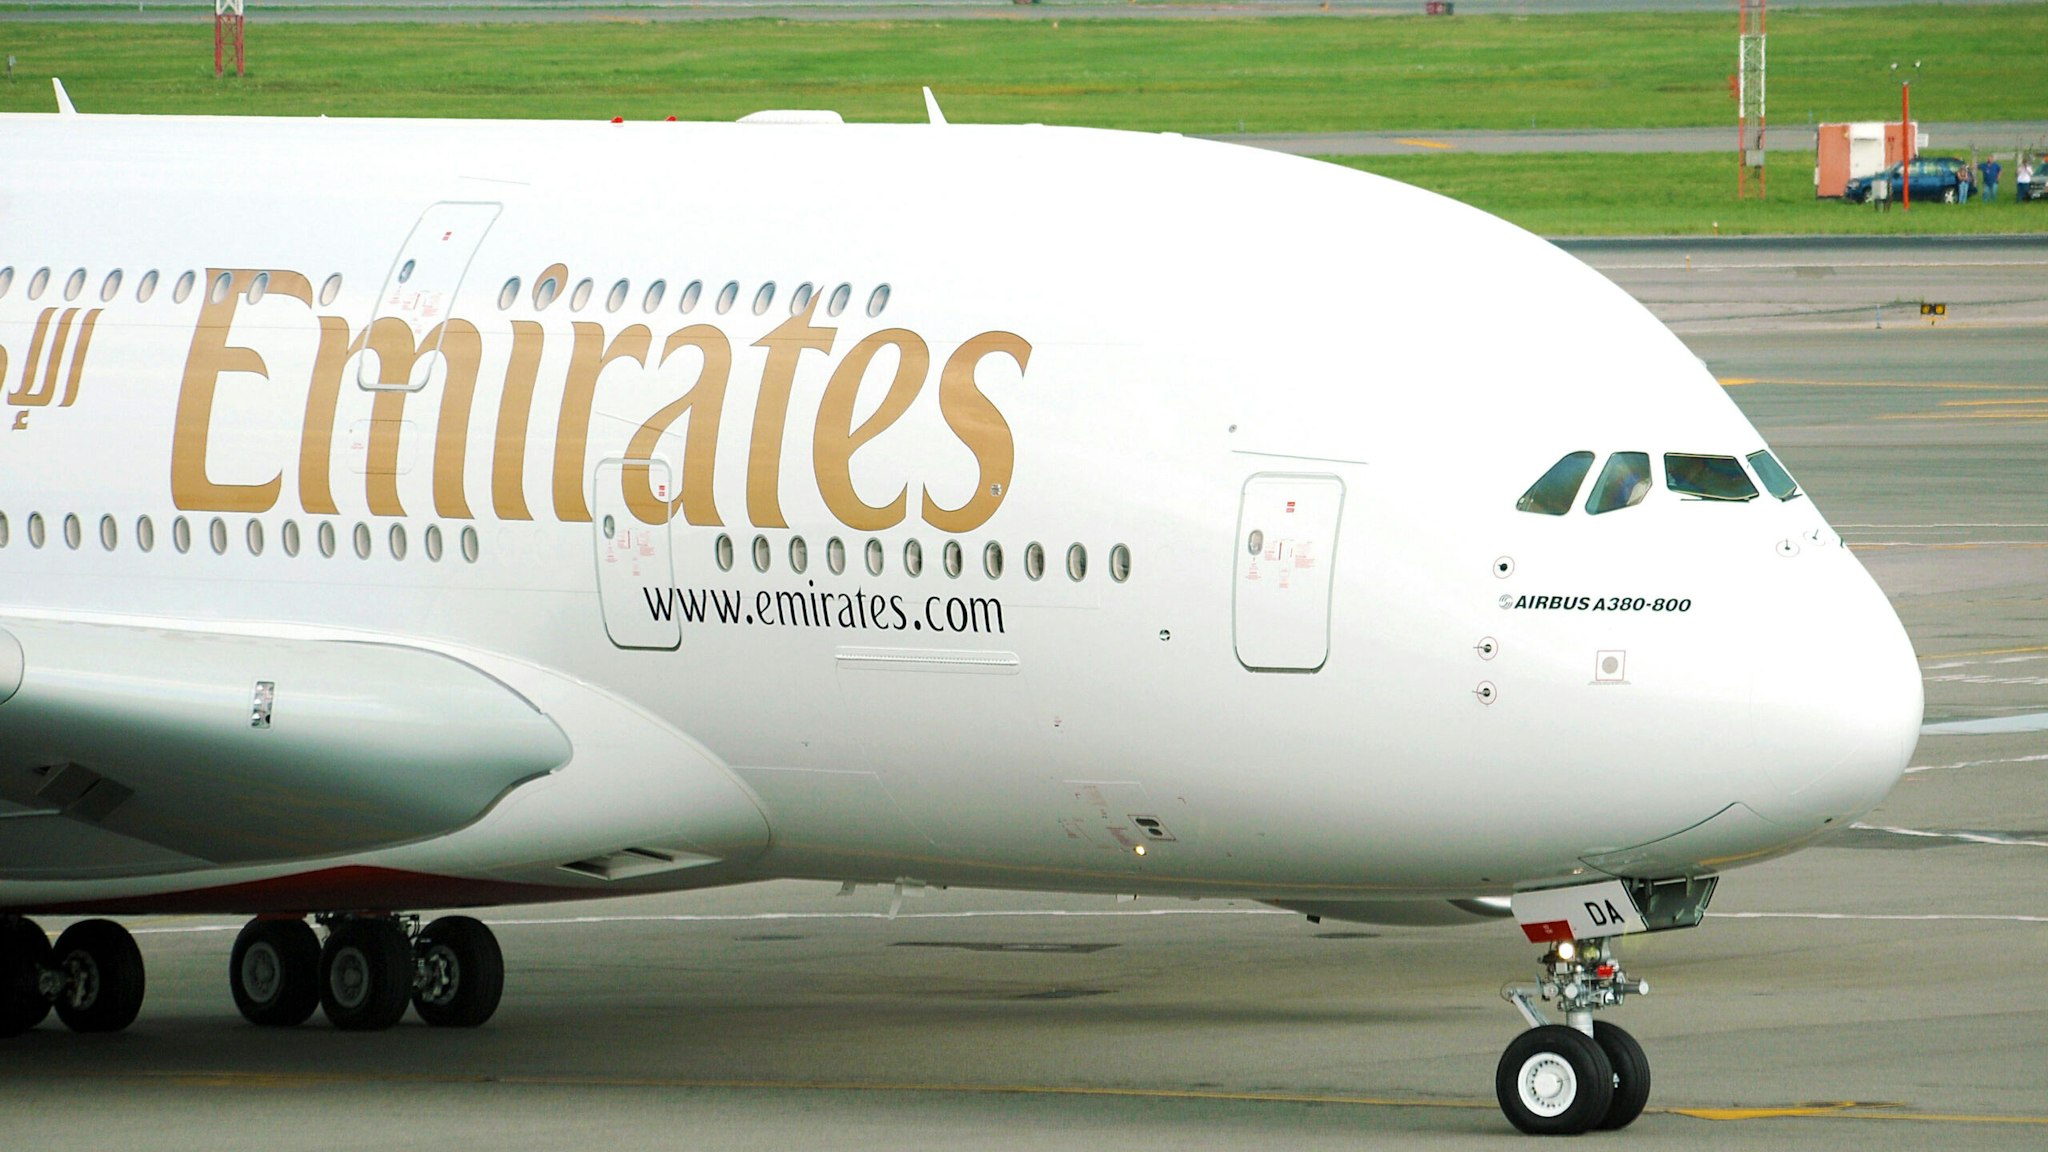 An Emirates Airline flight from Dubai lands on August 1, 2008 becoming the first commercial Airbus A380 jet to land in the United States at John F. Kennedy International Airport in New York. The A380 is the world's largest airliner with 49 percent more floor space and 35 percent more seating than the previous largest aircraft.